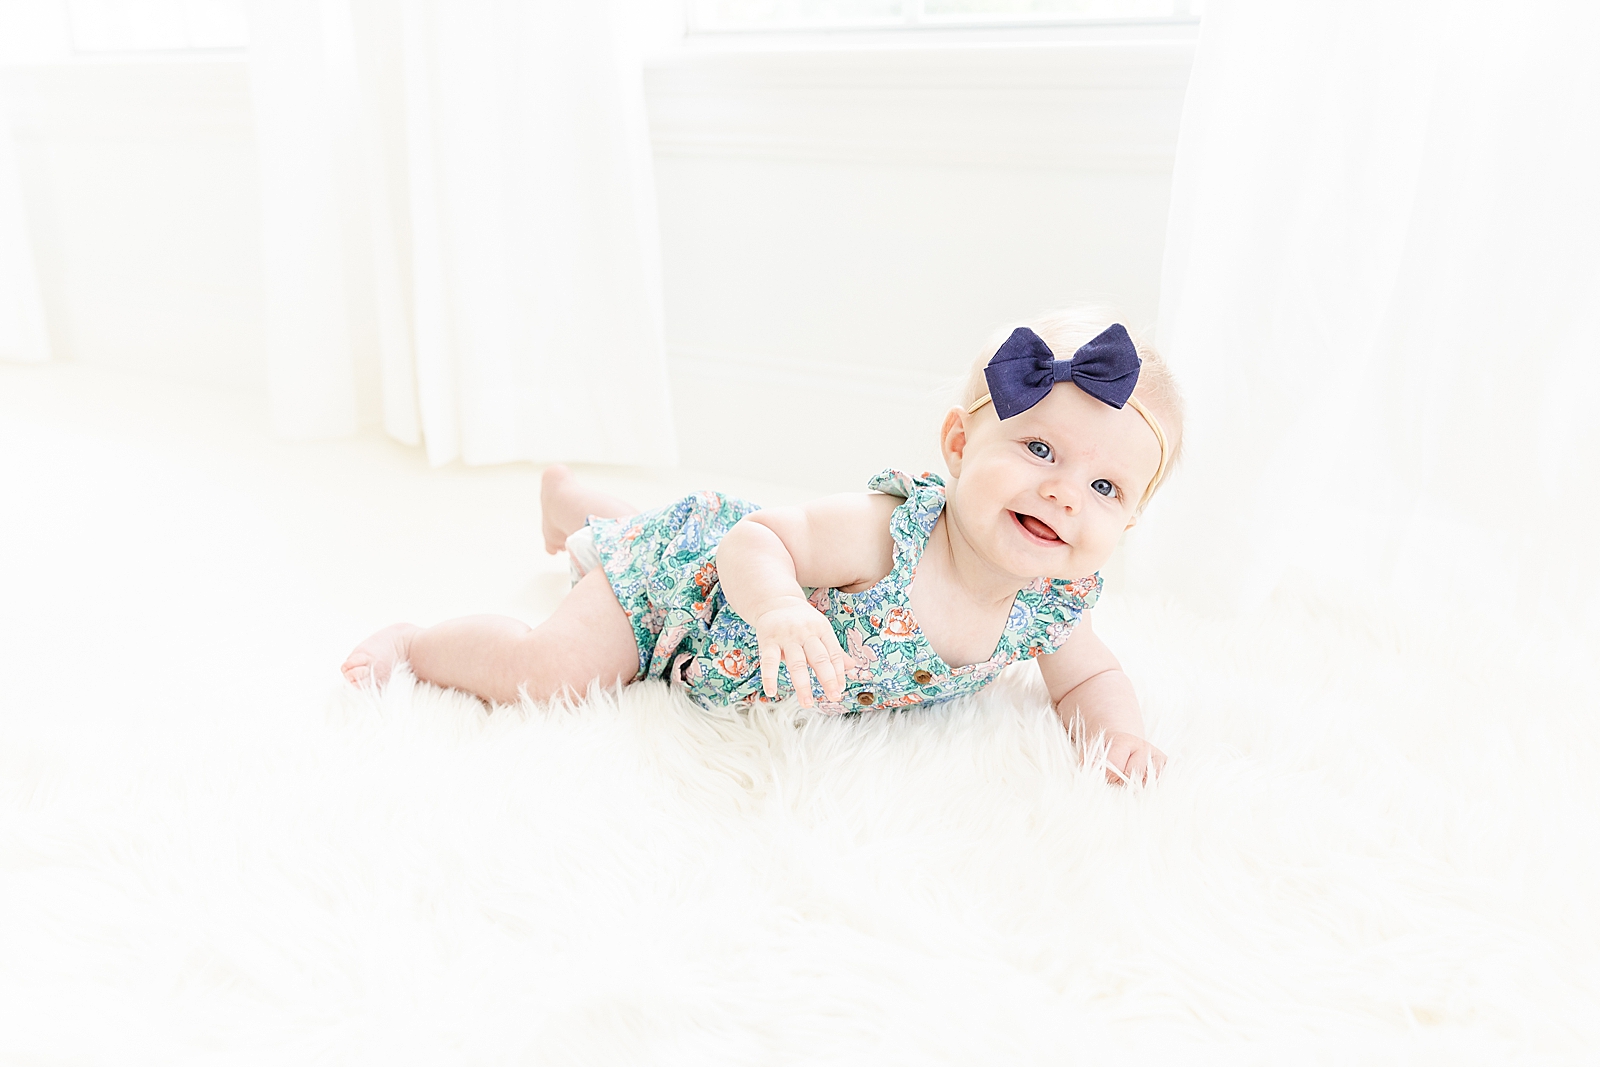 baby girl in floral romper from old navy with a blue bow on tummy on white fur rug smiling up at camera